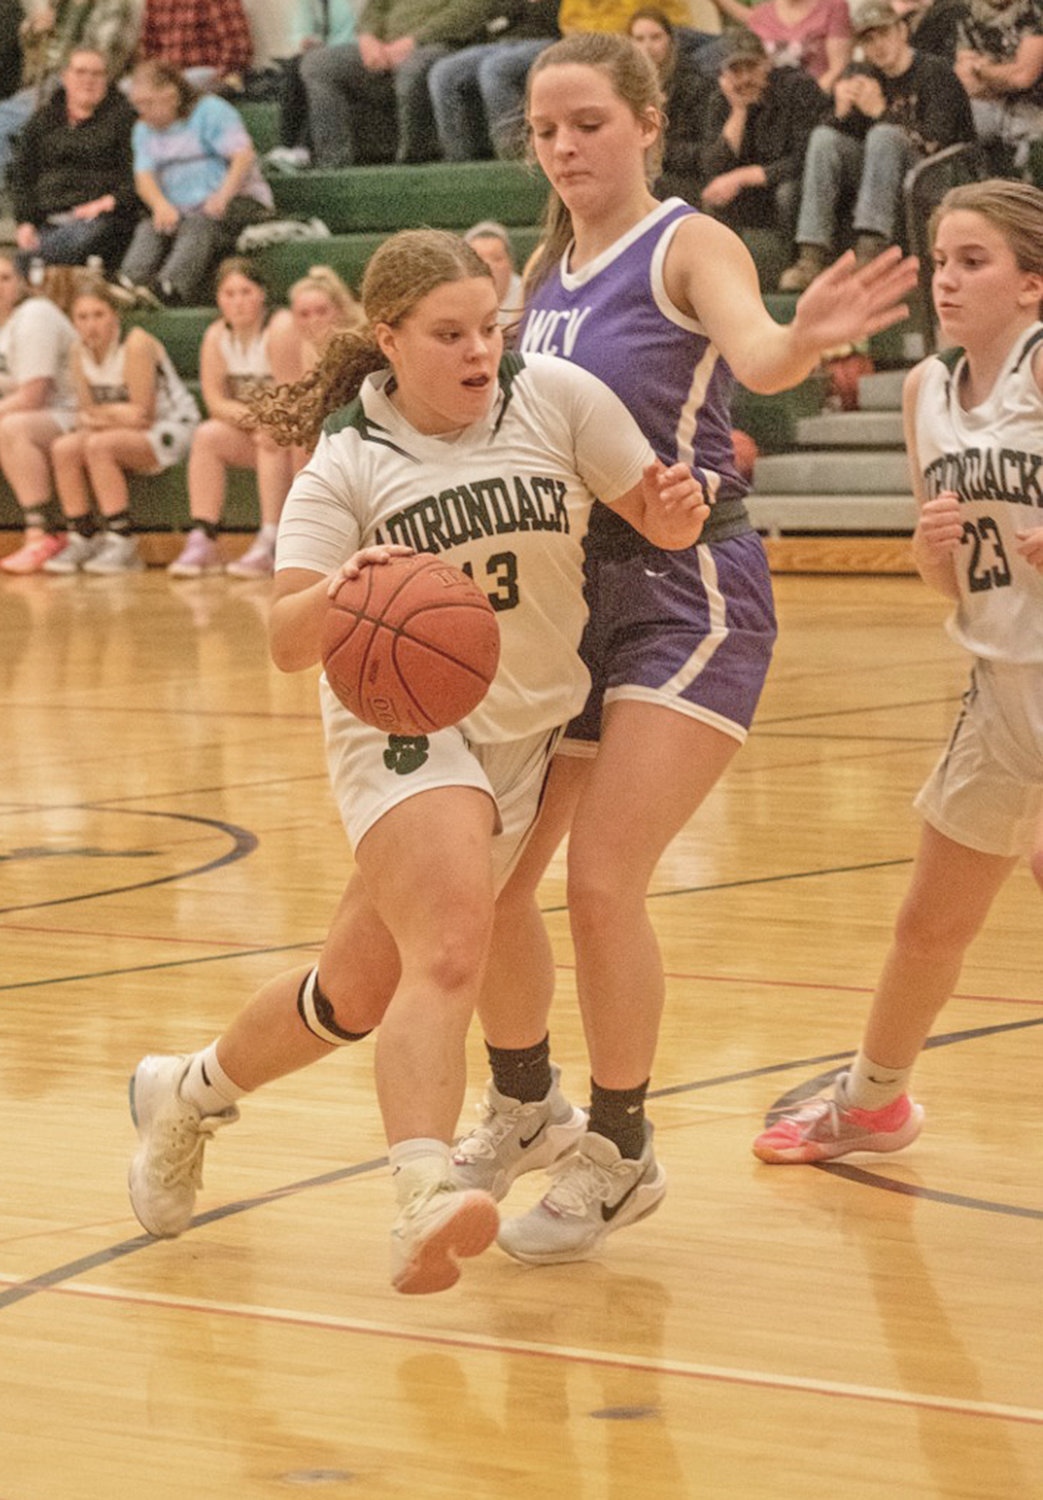 Adirondack's Emma Weiler takes on a West Canada Valley defender Monday at home. Weiler had five points but the Wildcats lost 59-46. At right is Adirondack's Raquel Paschke, who scored four.